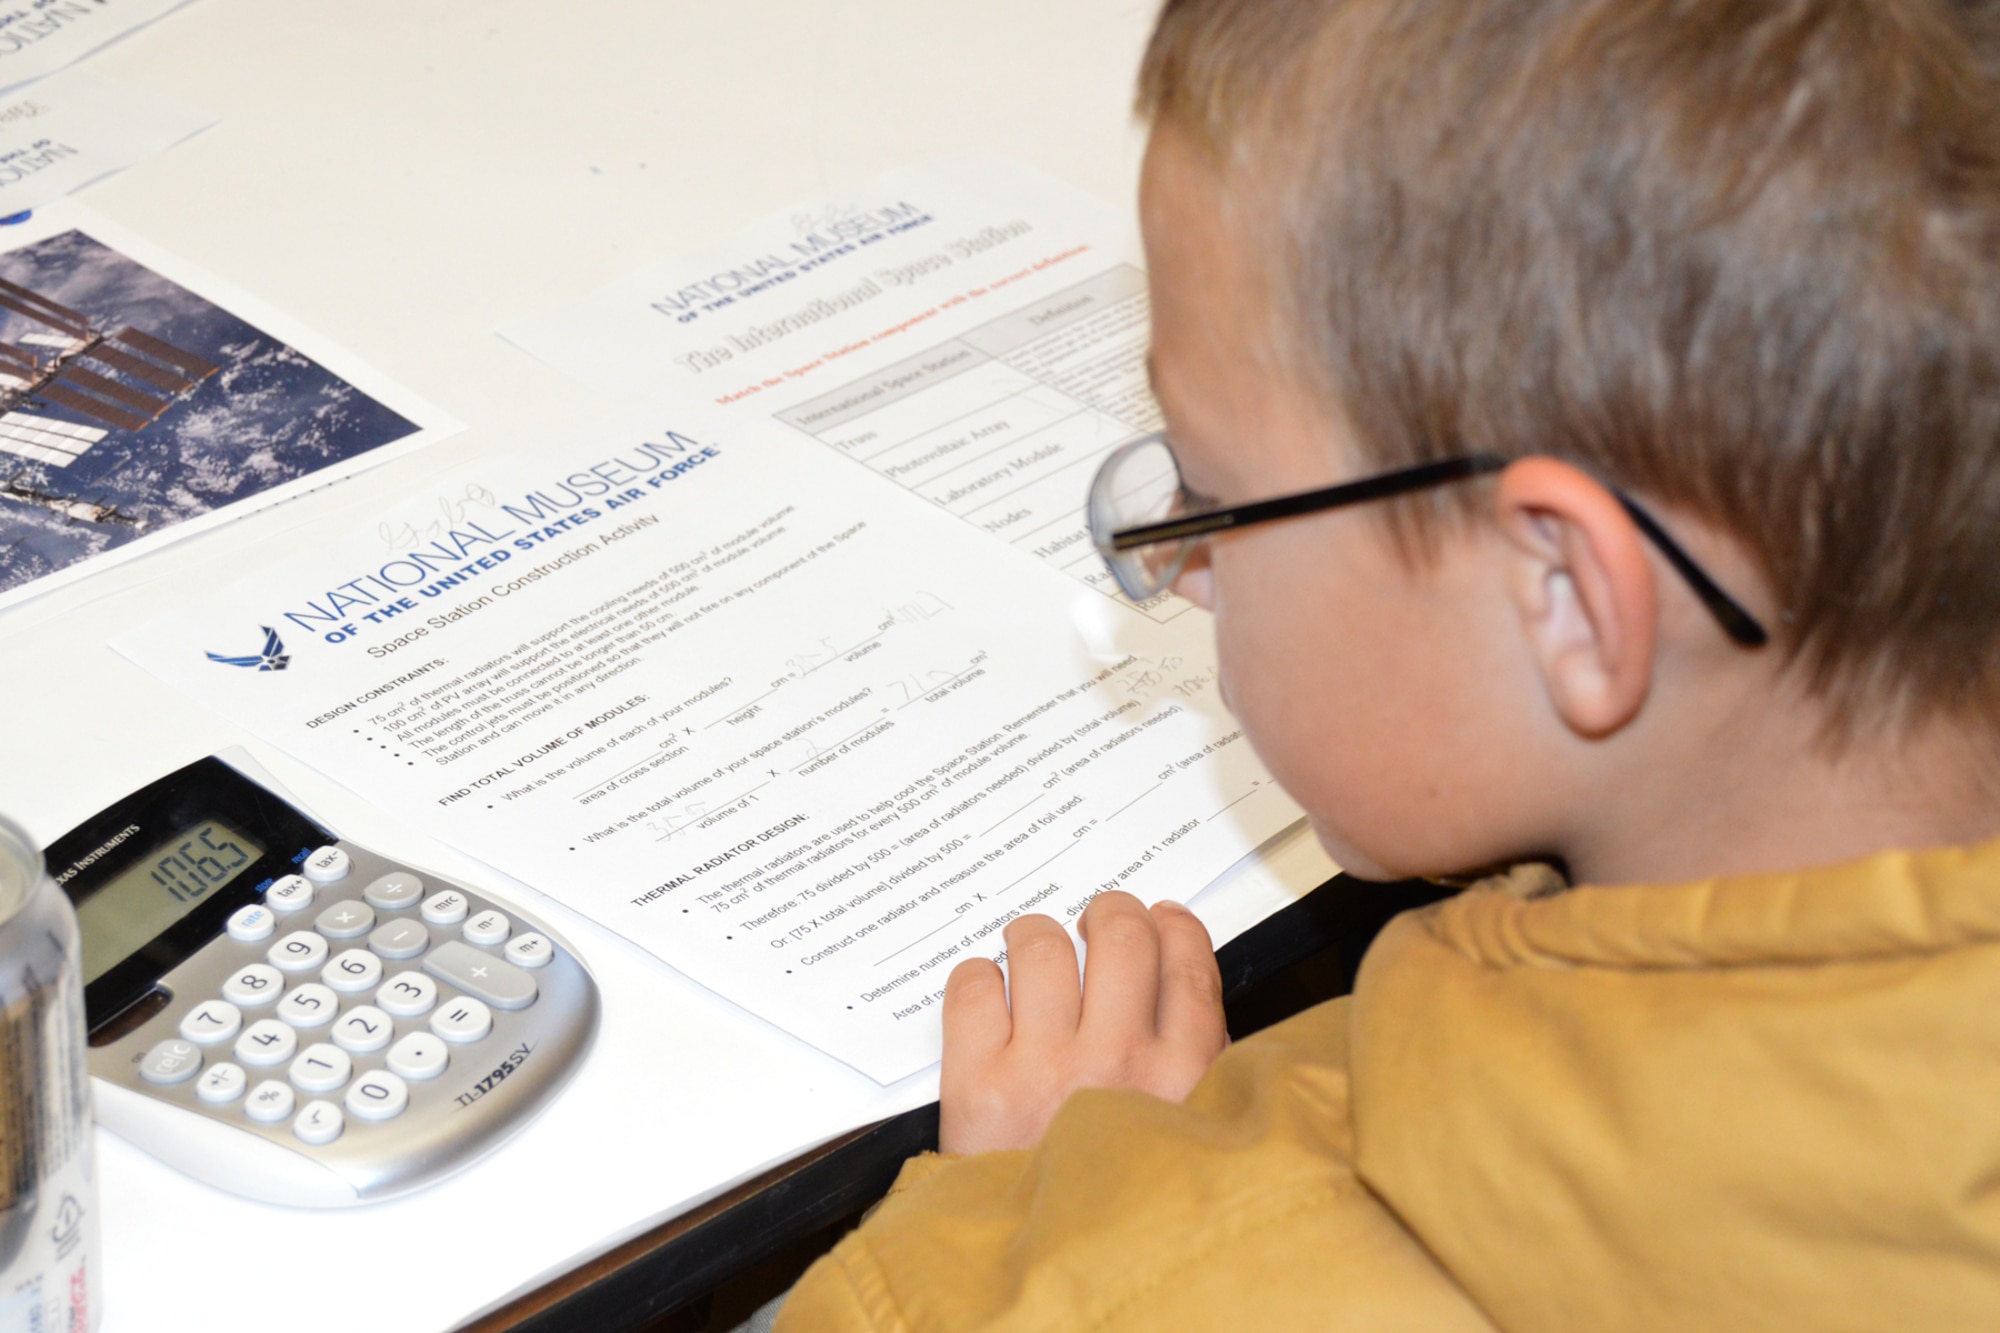 DAYTON, Ohio -- Homeschool students practice math skills while learning about the International Space Station during Home School Day on October 6, 2014, at the National Museum of the U.S. Air Force. (U.S. Air Force photo)